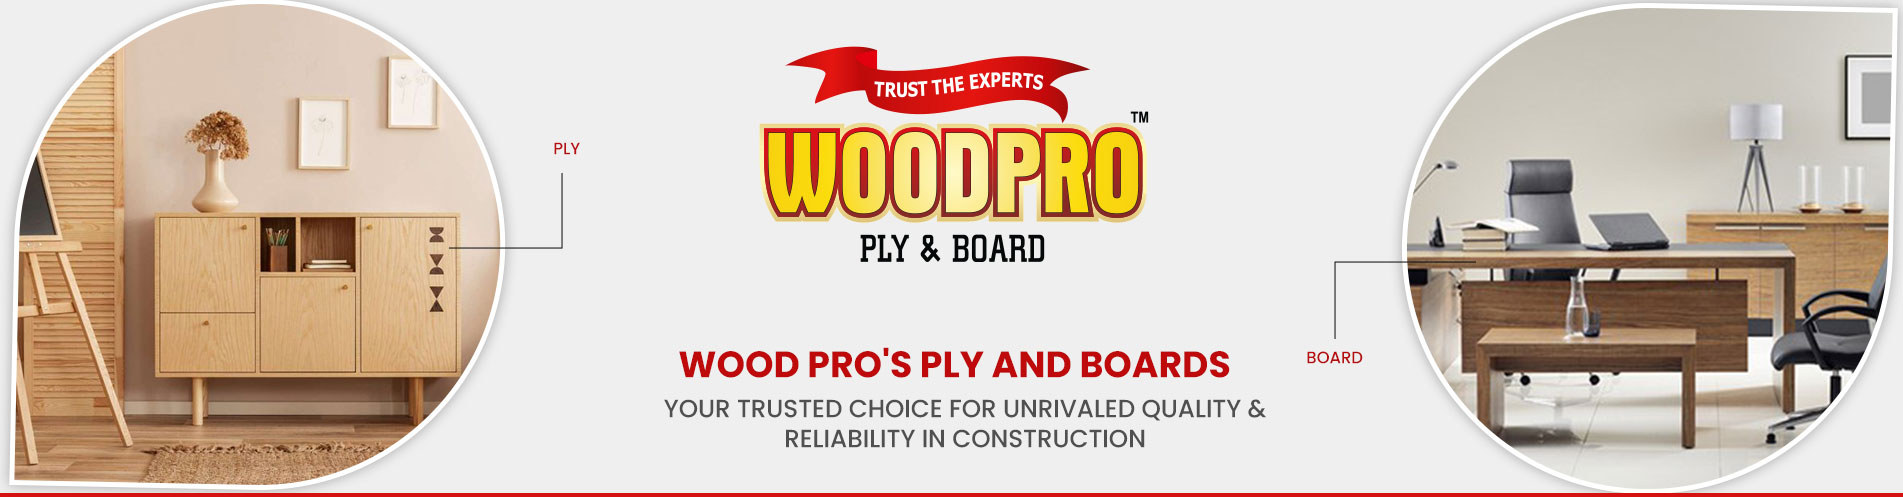 our-brand-wood-pro banner